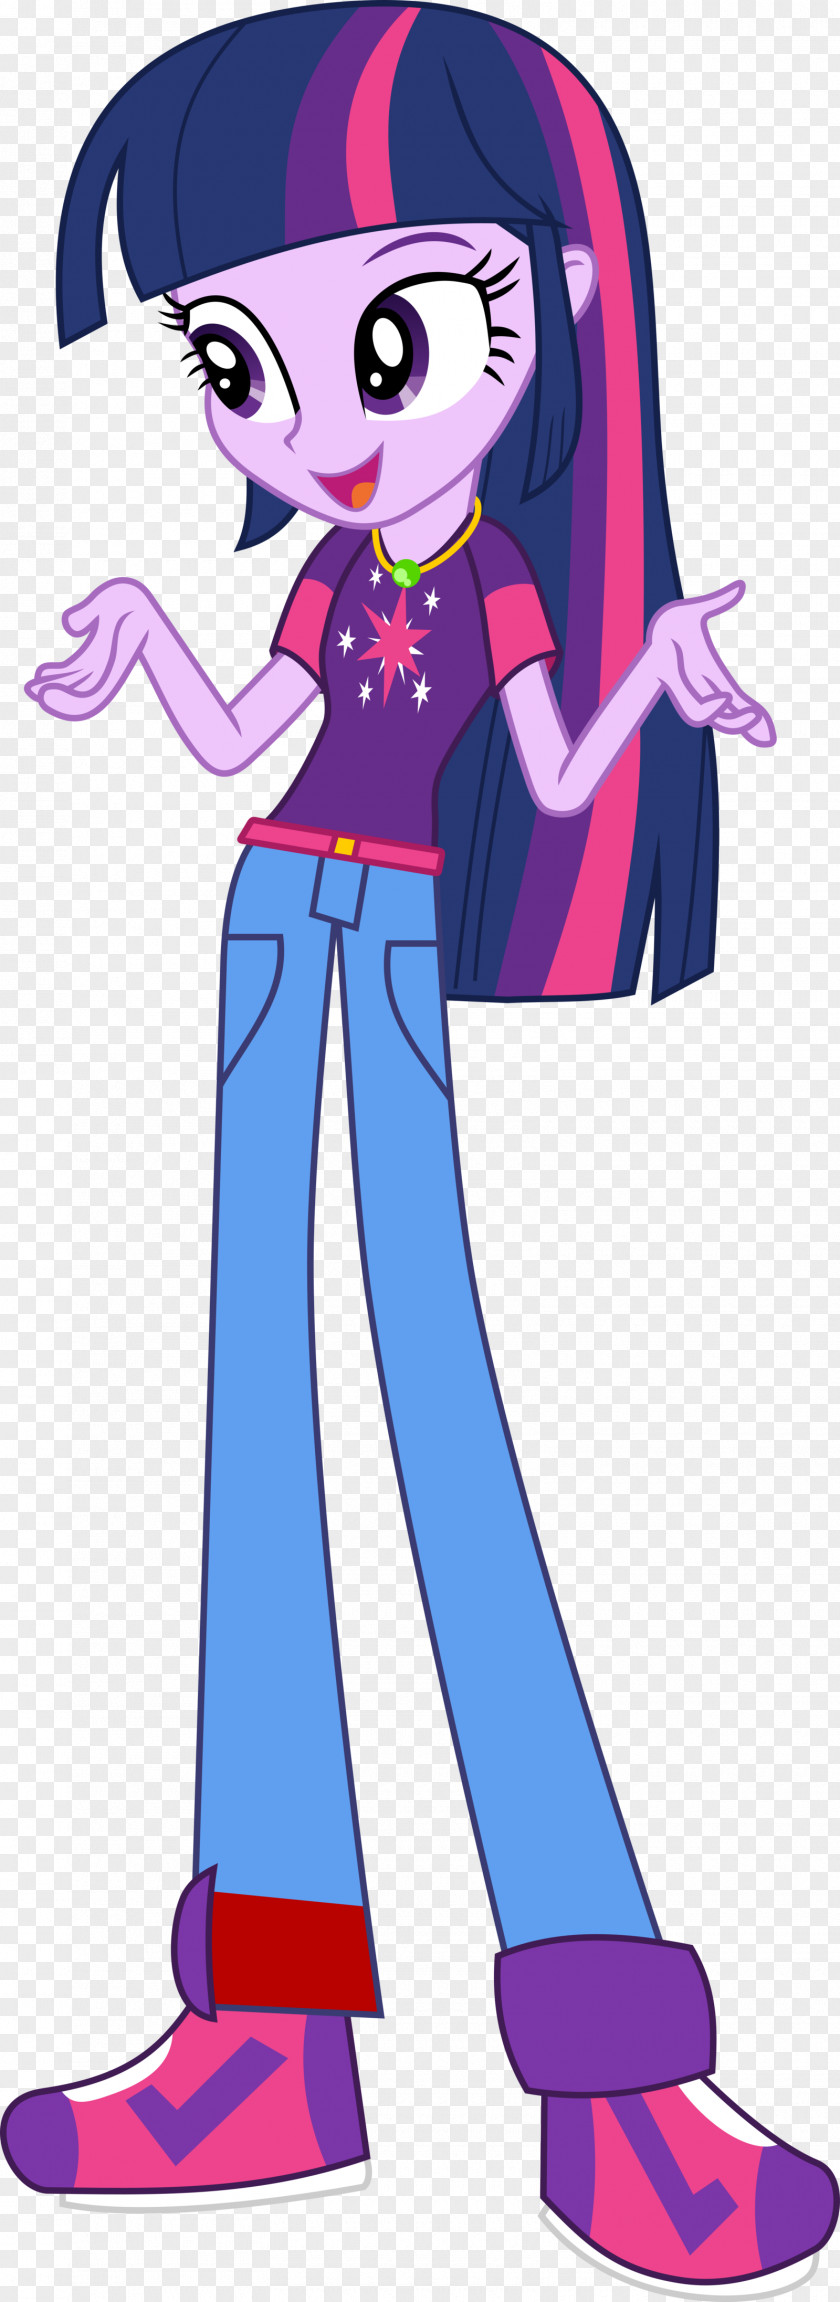 Sunset Riders Twilight Sparkle Female Pony Clip Art PNG